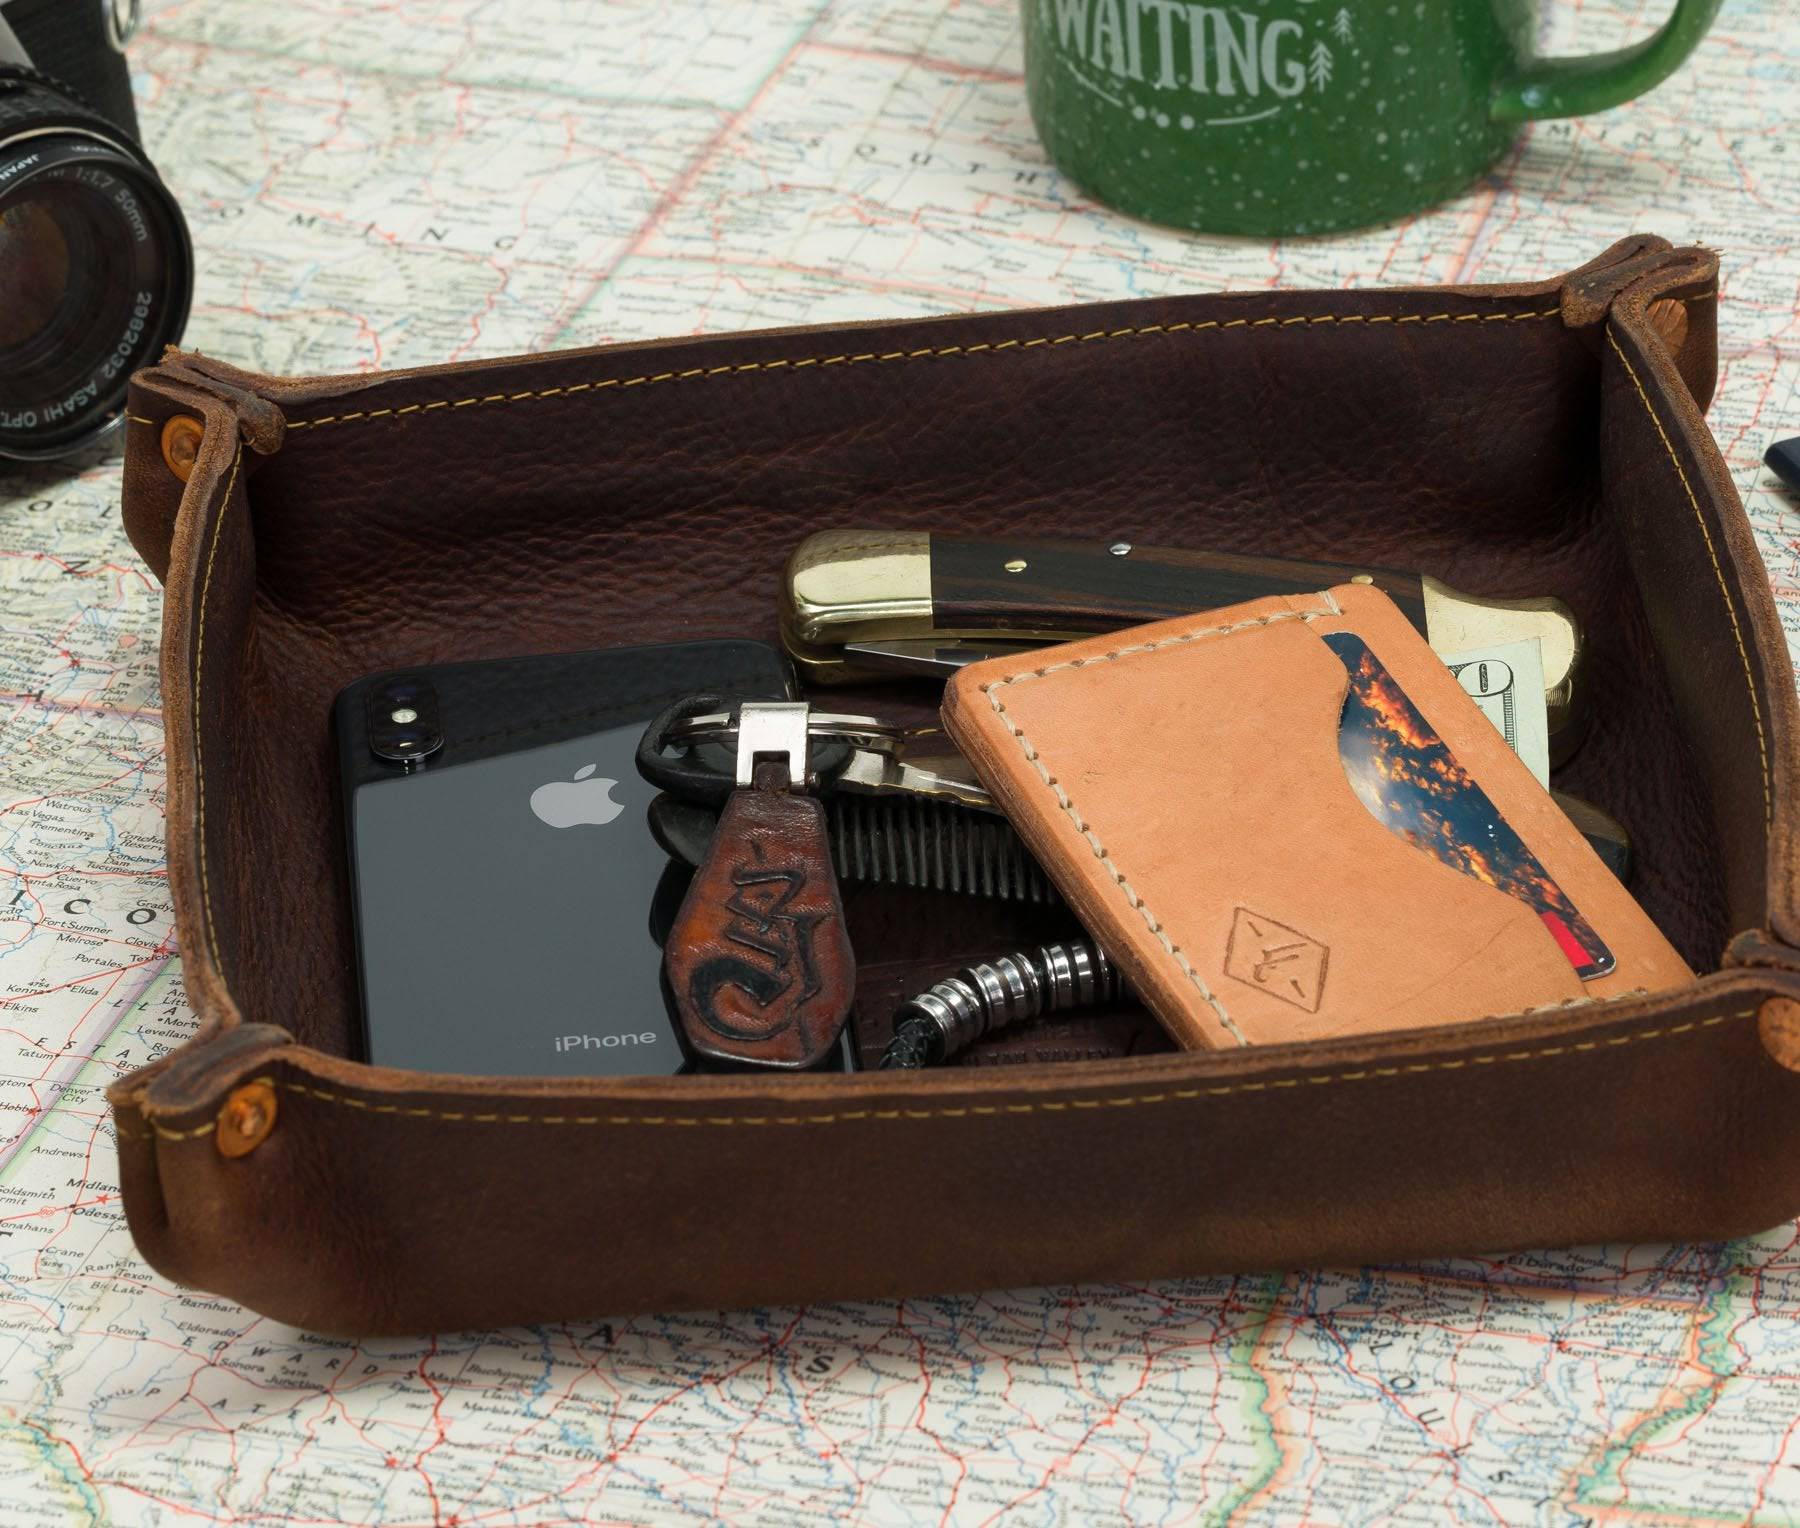  Rivet Valet Tray by Lifetime Leather Co Lifetime Leather Co Perfumarie